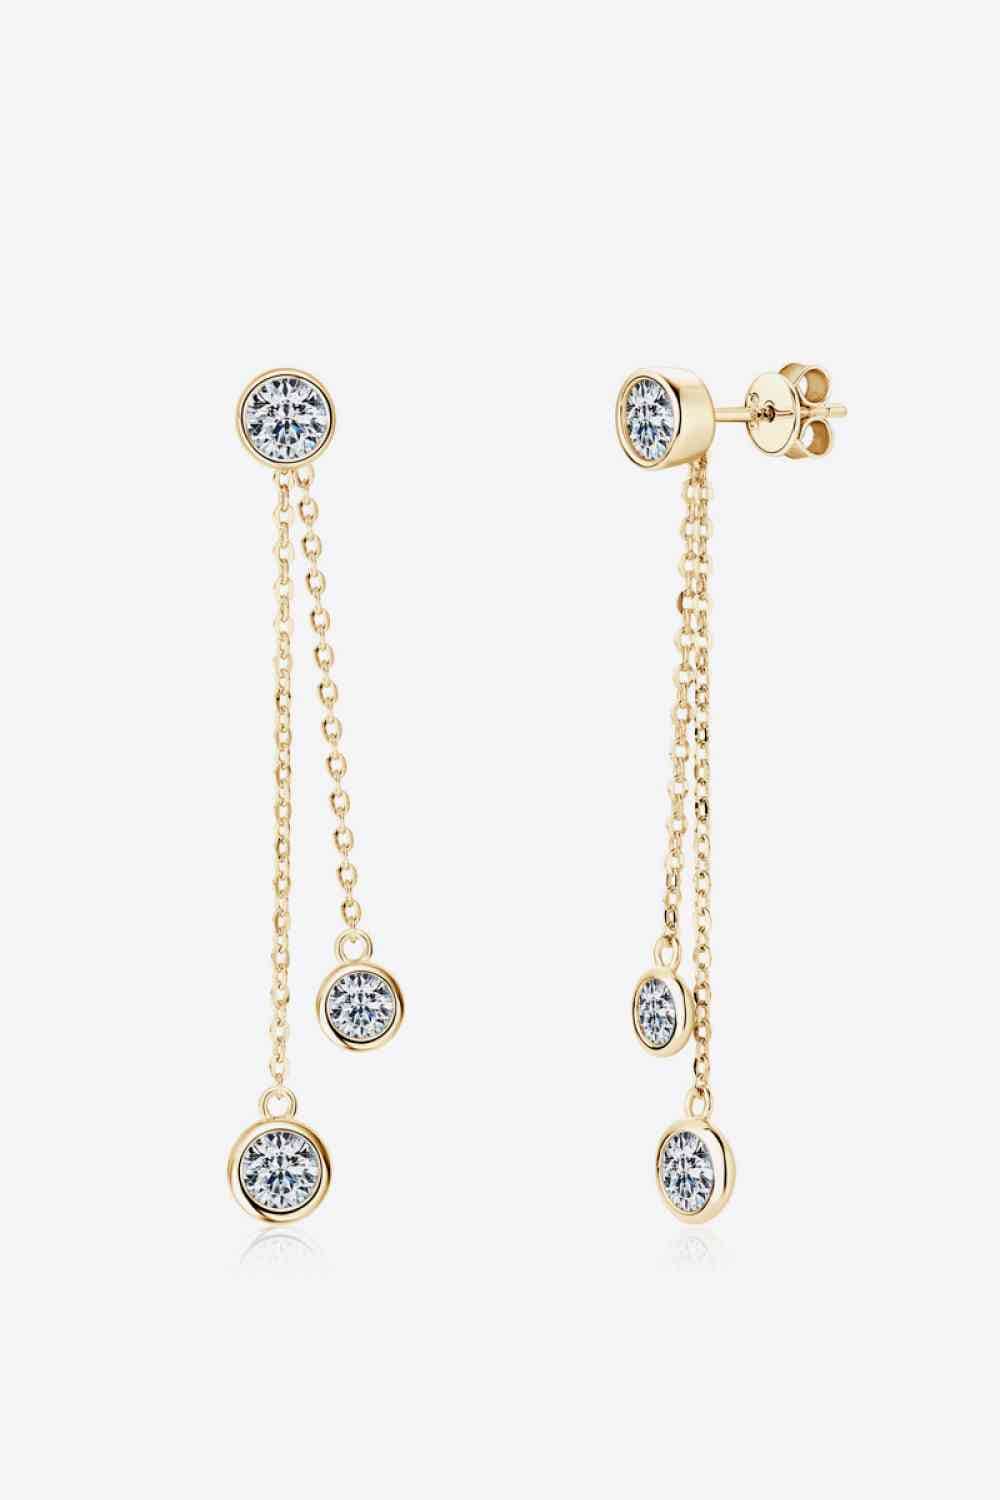 Trendsi Gold / One Size 2.6 Carat Moissanite 925 Sterling Silver Earrings 101300089626644 Apparel &amp; Accessories &gt; Clothing &gt; Sleepwear &amp; Loungewear &gt; Robes